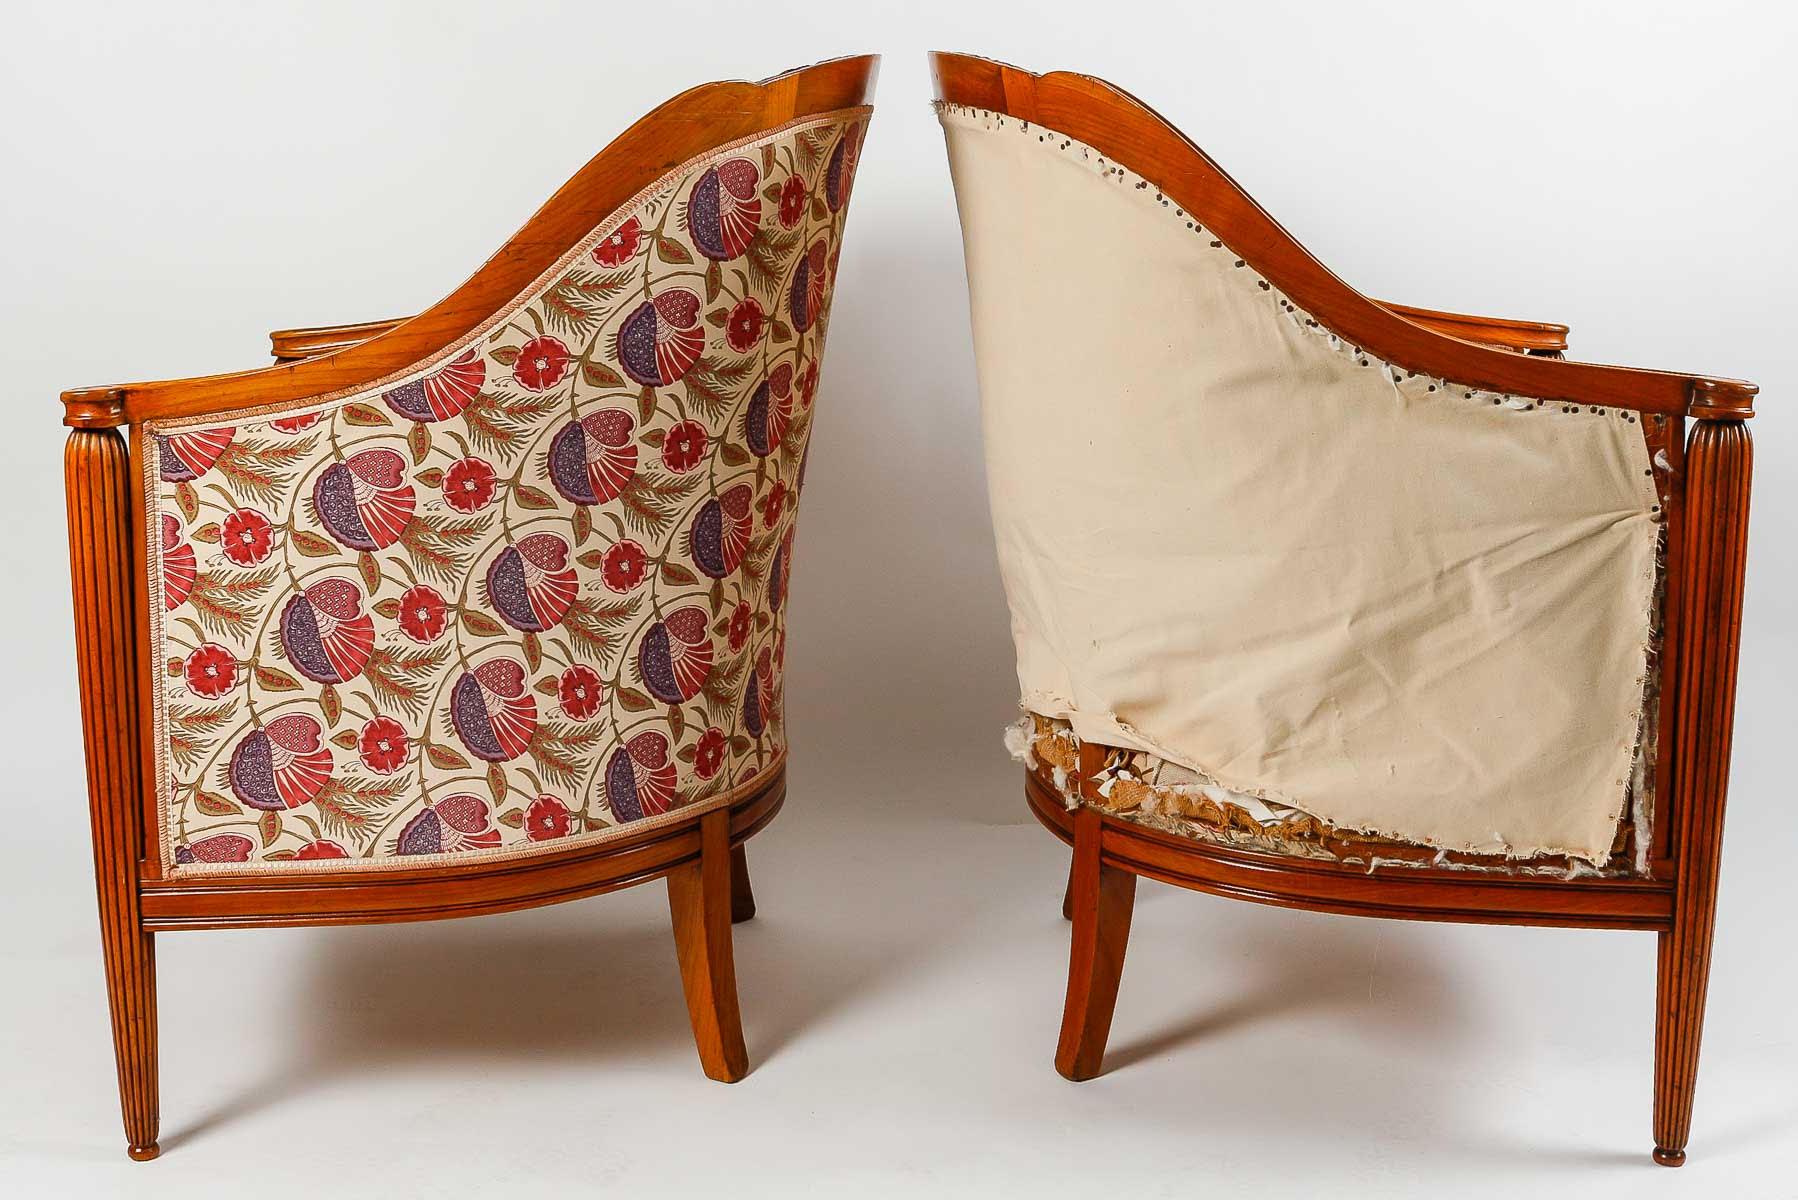 Pair of Art Deco cherrywood armchairs, 1930.

Pair of Art Deco period armchairs, circa 1930, in cherrywood carved with stylized roses, fabric to be redone, upholstery in good condition, wood in very good condition.

Dimensions: h: 88cm, w: 68cm, d: